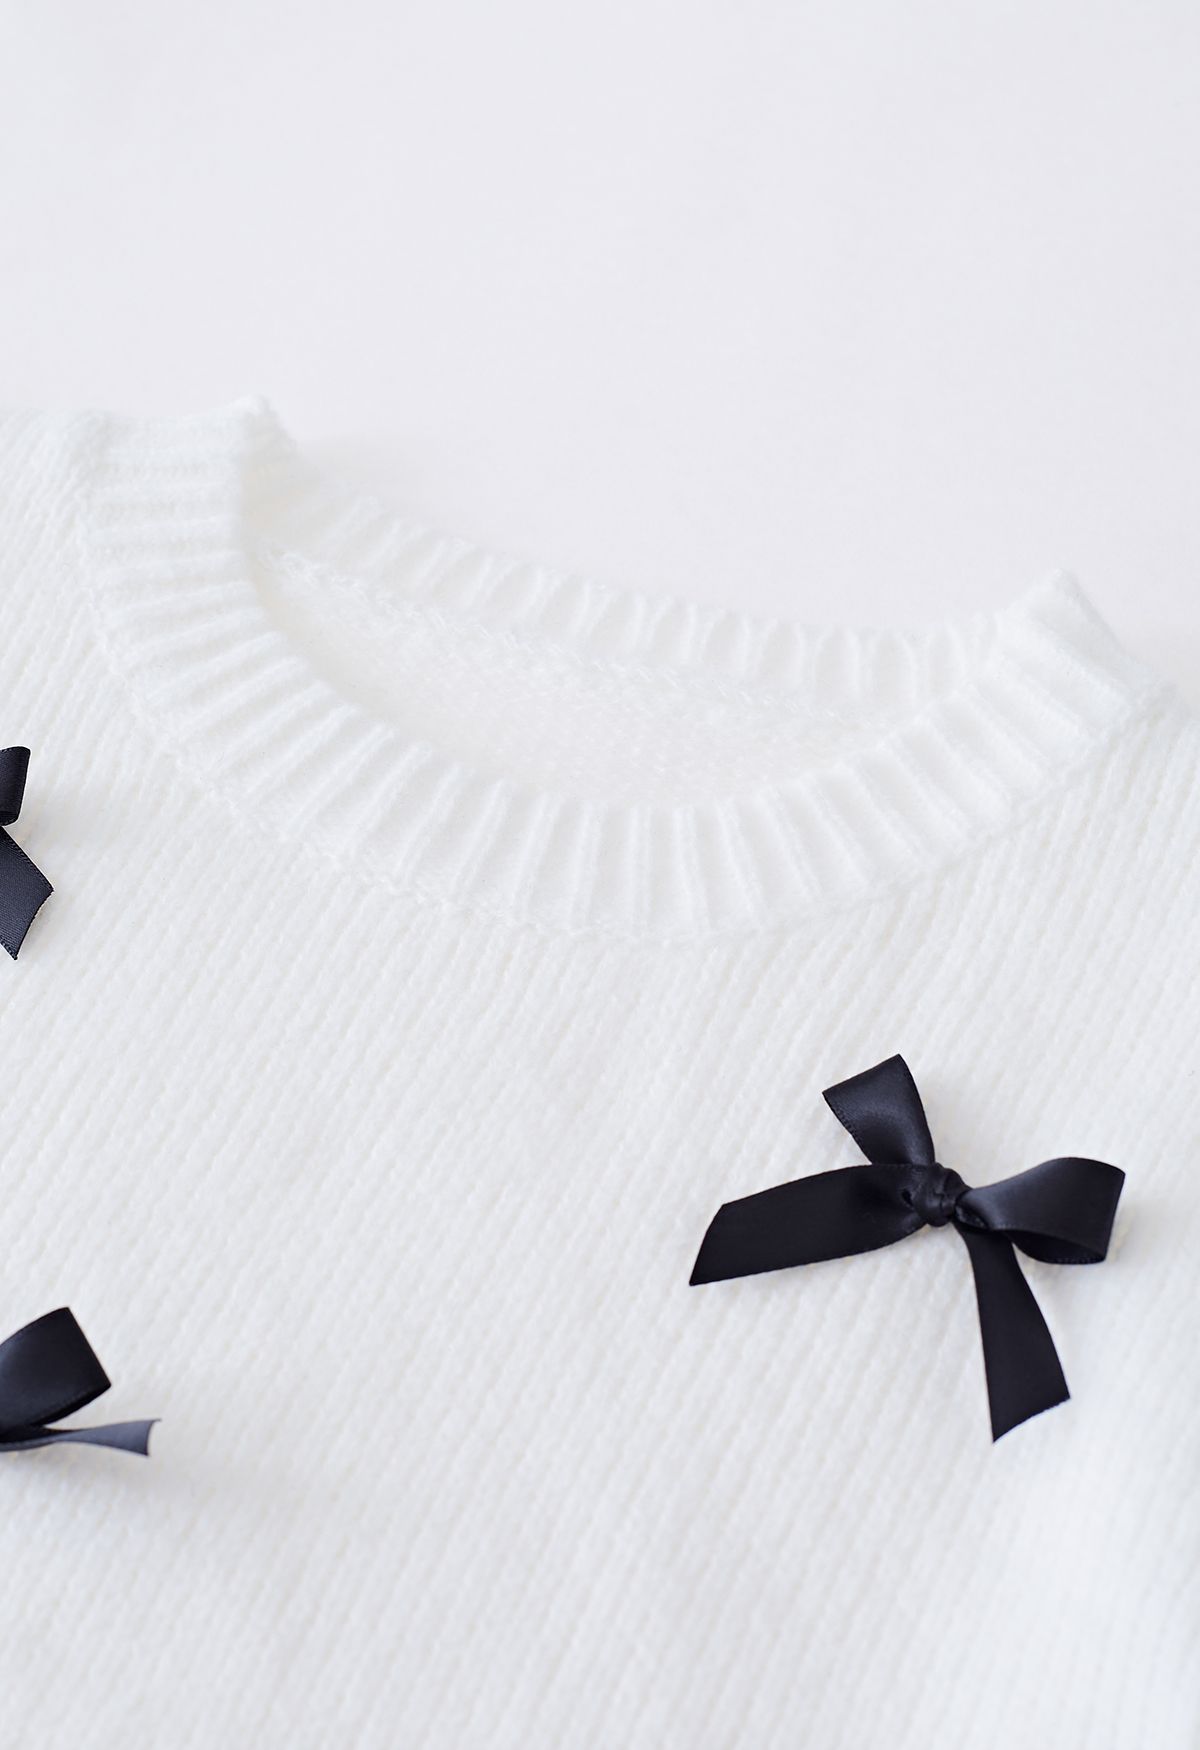 Bowknot Embellished Short Sleeve Knit Sweater in White